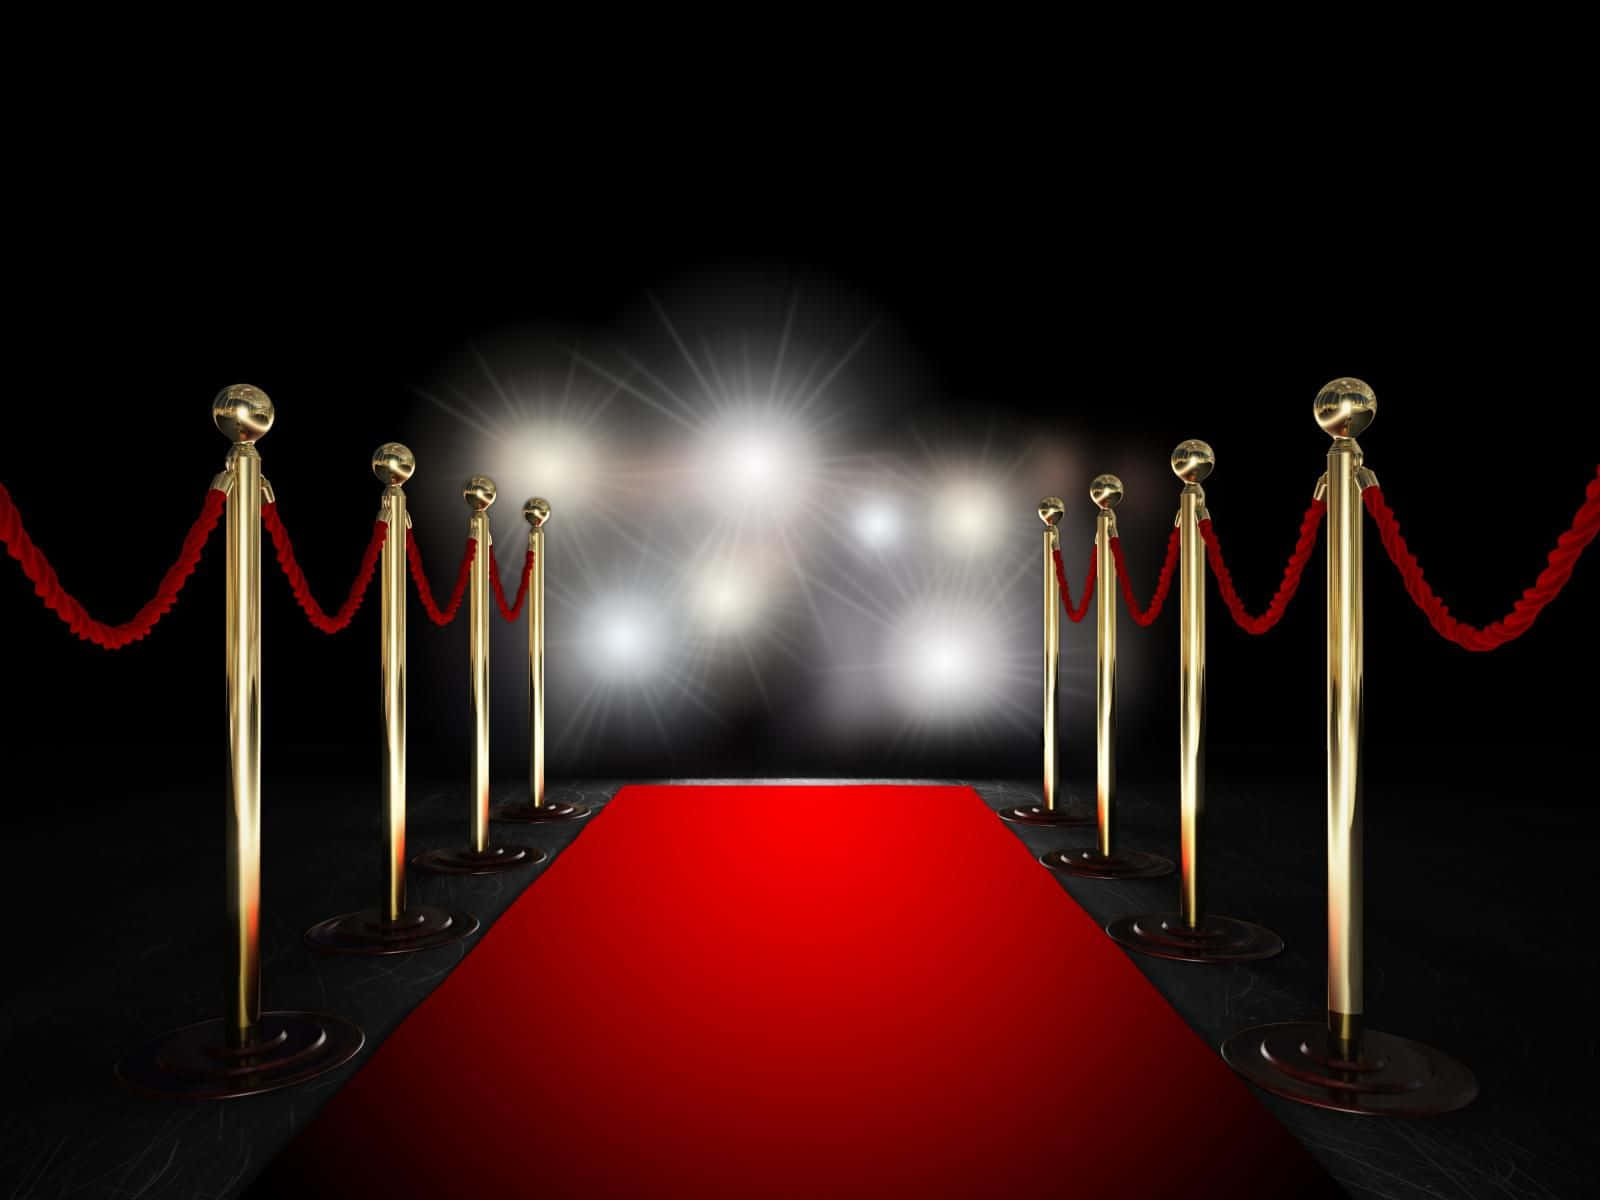 Red Carpet With Ropes And Ropes